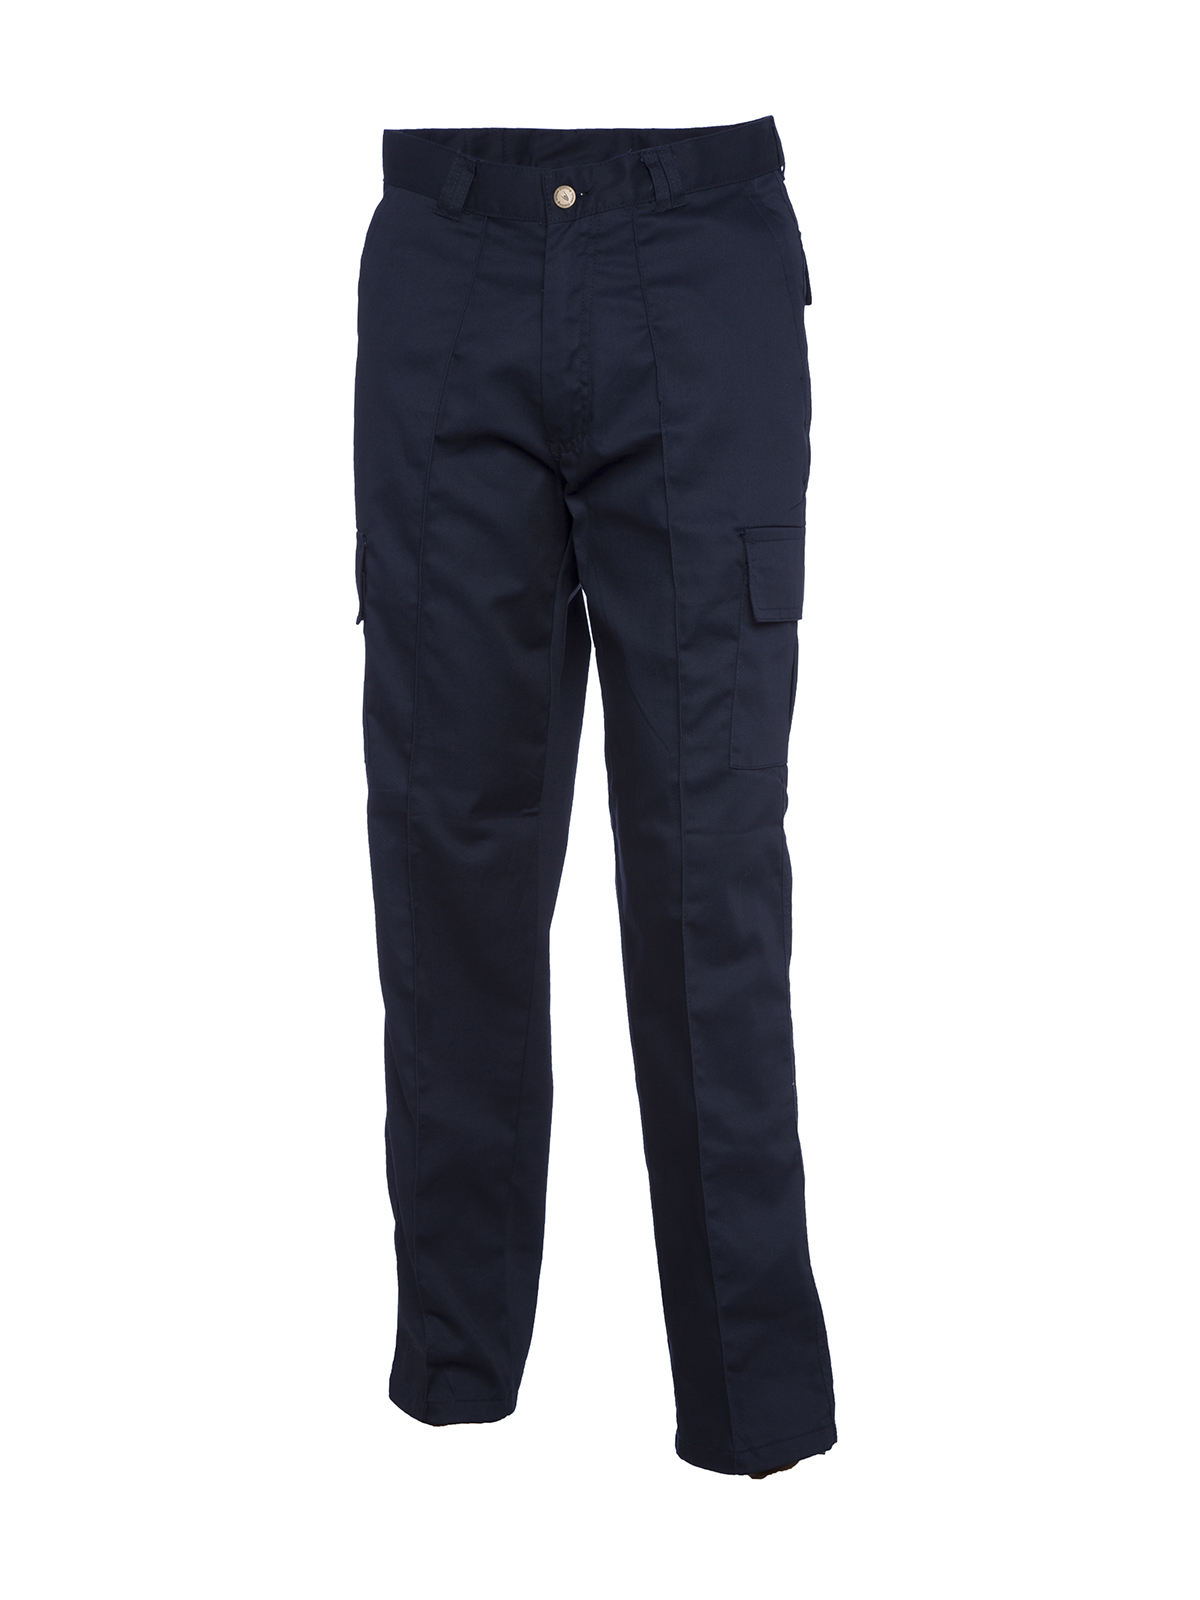 Cargo Trousers, Navy Blue - 32L